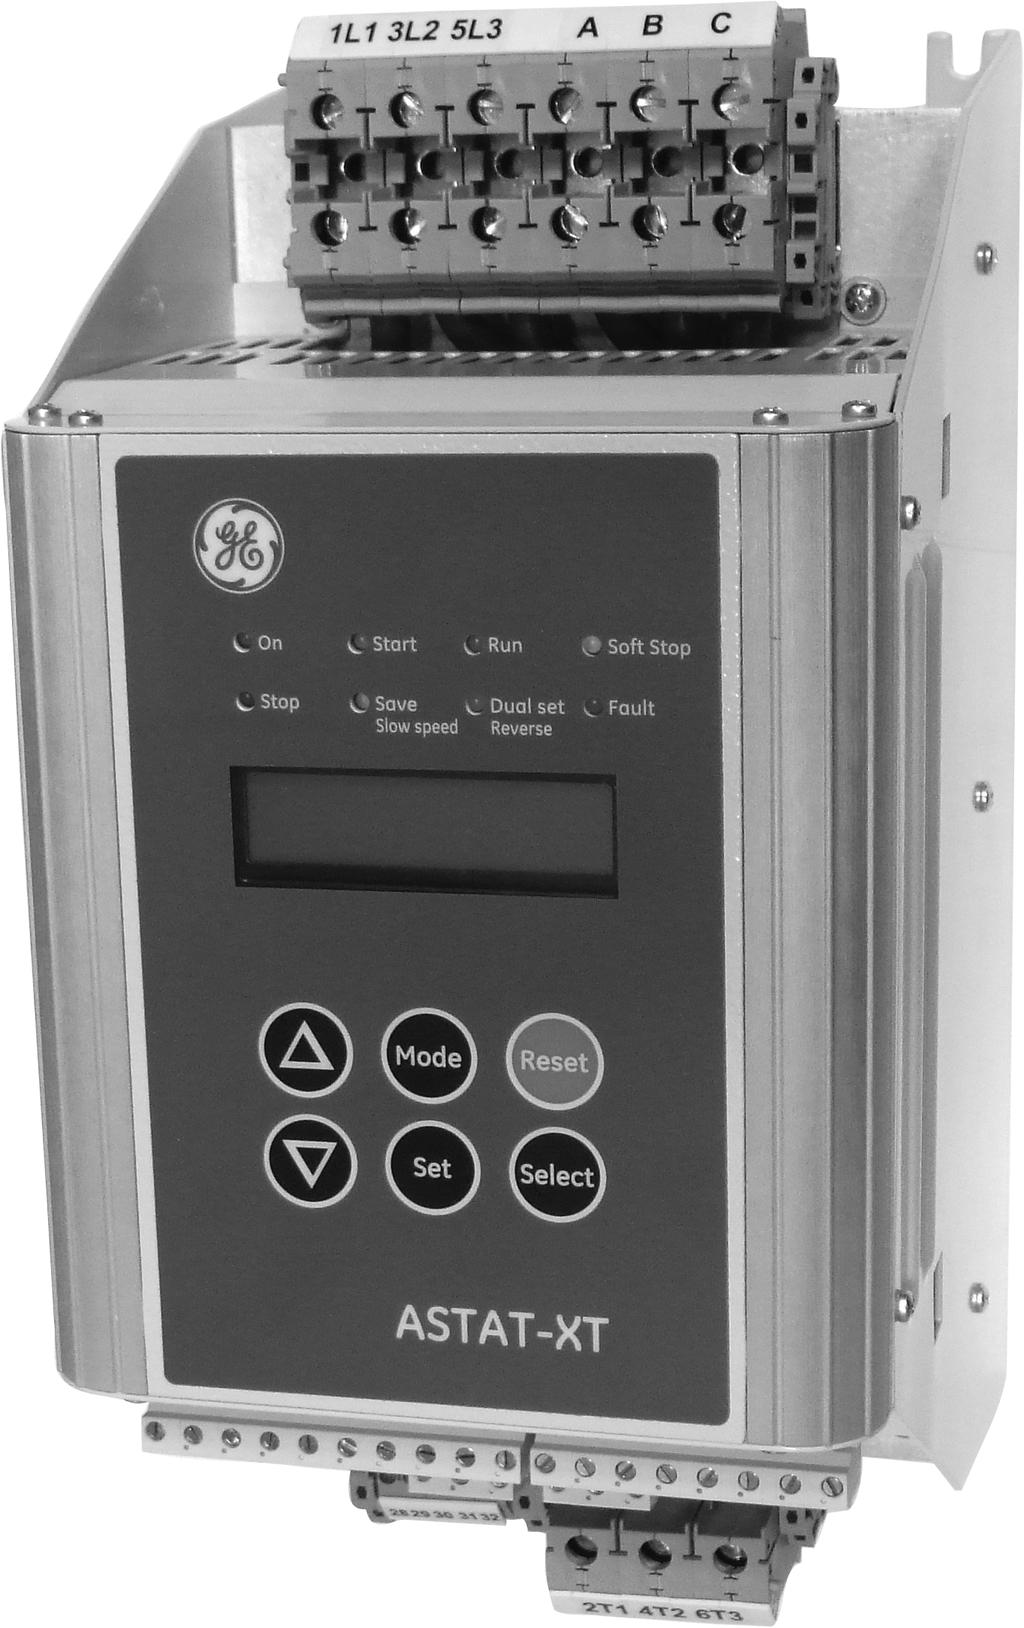 Reduced Voltage Starters Reduced Voltage Starters- ASTAT XT Soft Starter Description and Features...2-2 Product Number Configuration...2-3 NEMA and IEC Ratings...2-4 Technical Specifications.